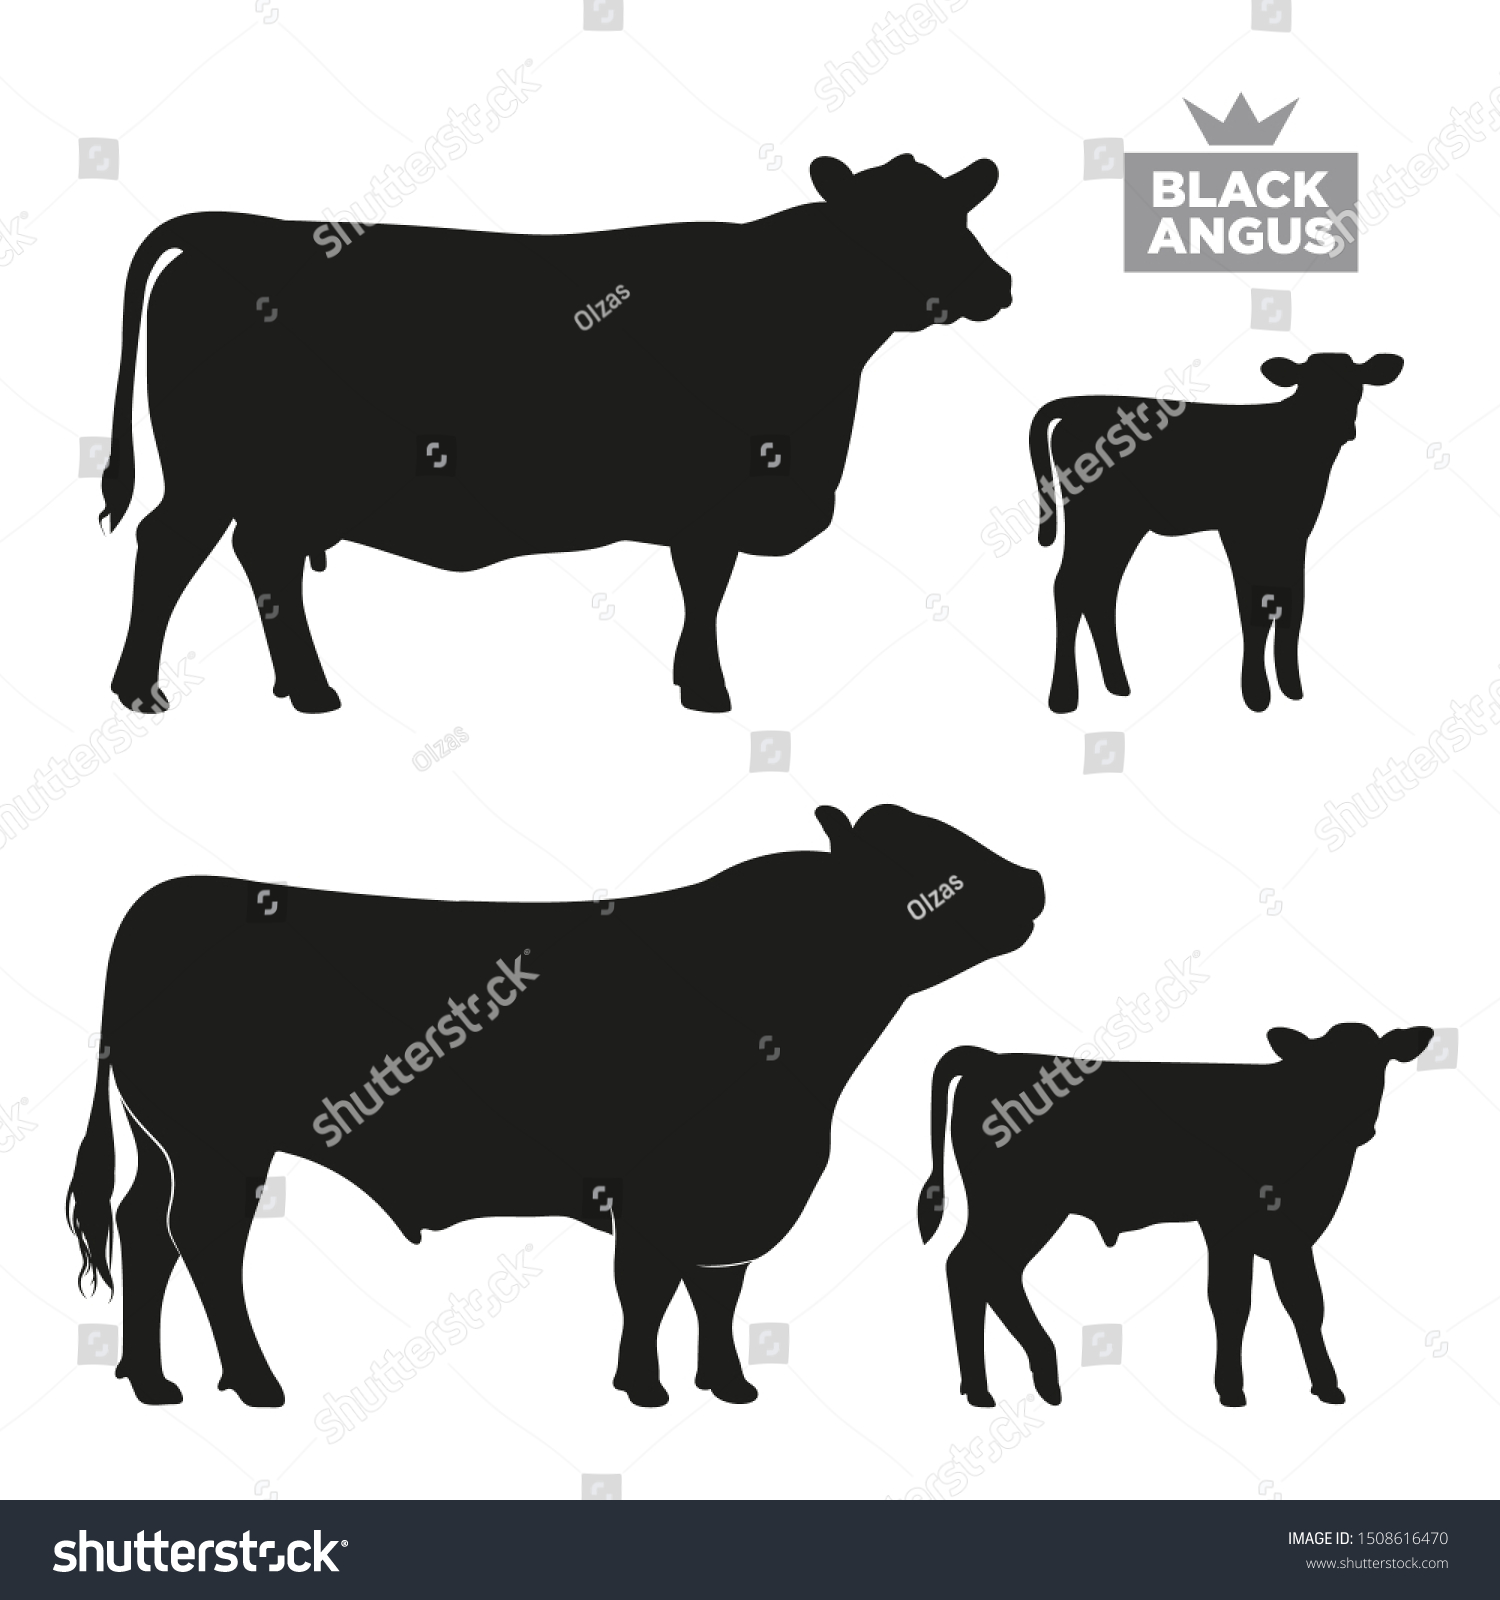 SVG of Set of cows. Black silhouette bull, cow and calfs isolated on white. Breed Black Angus. Hand drawn vector illustration. svg